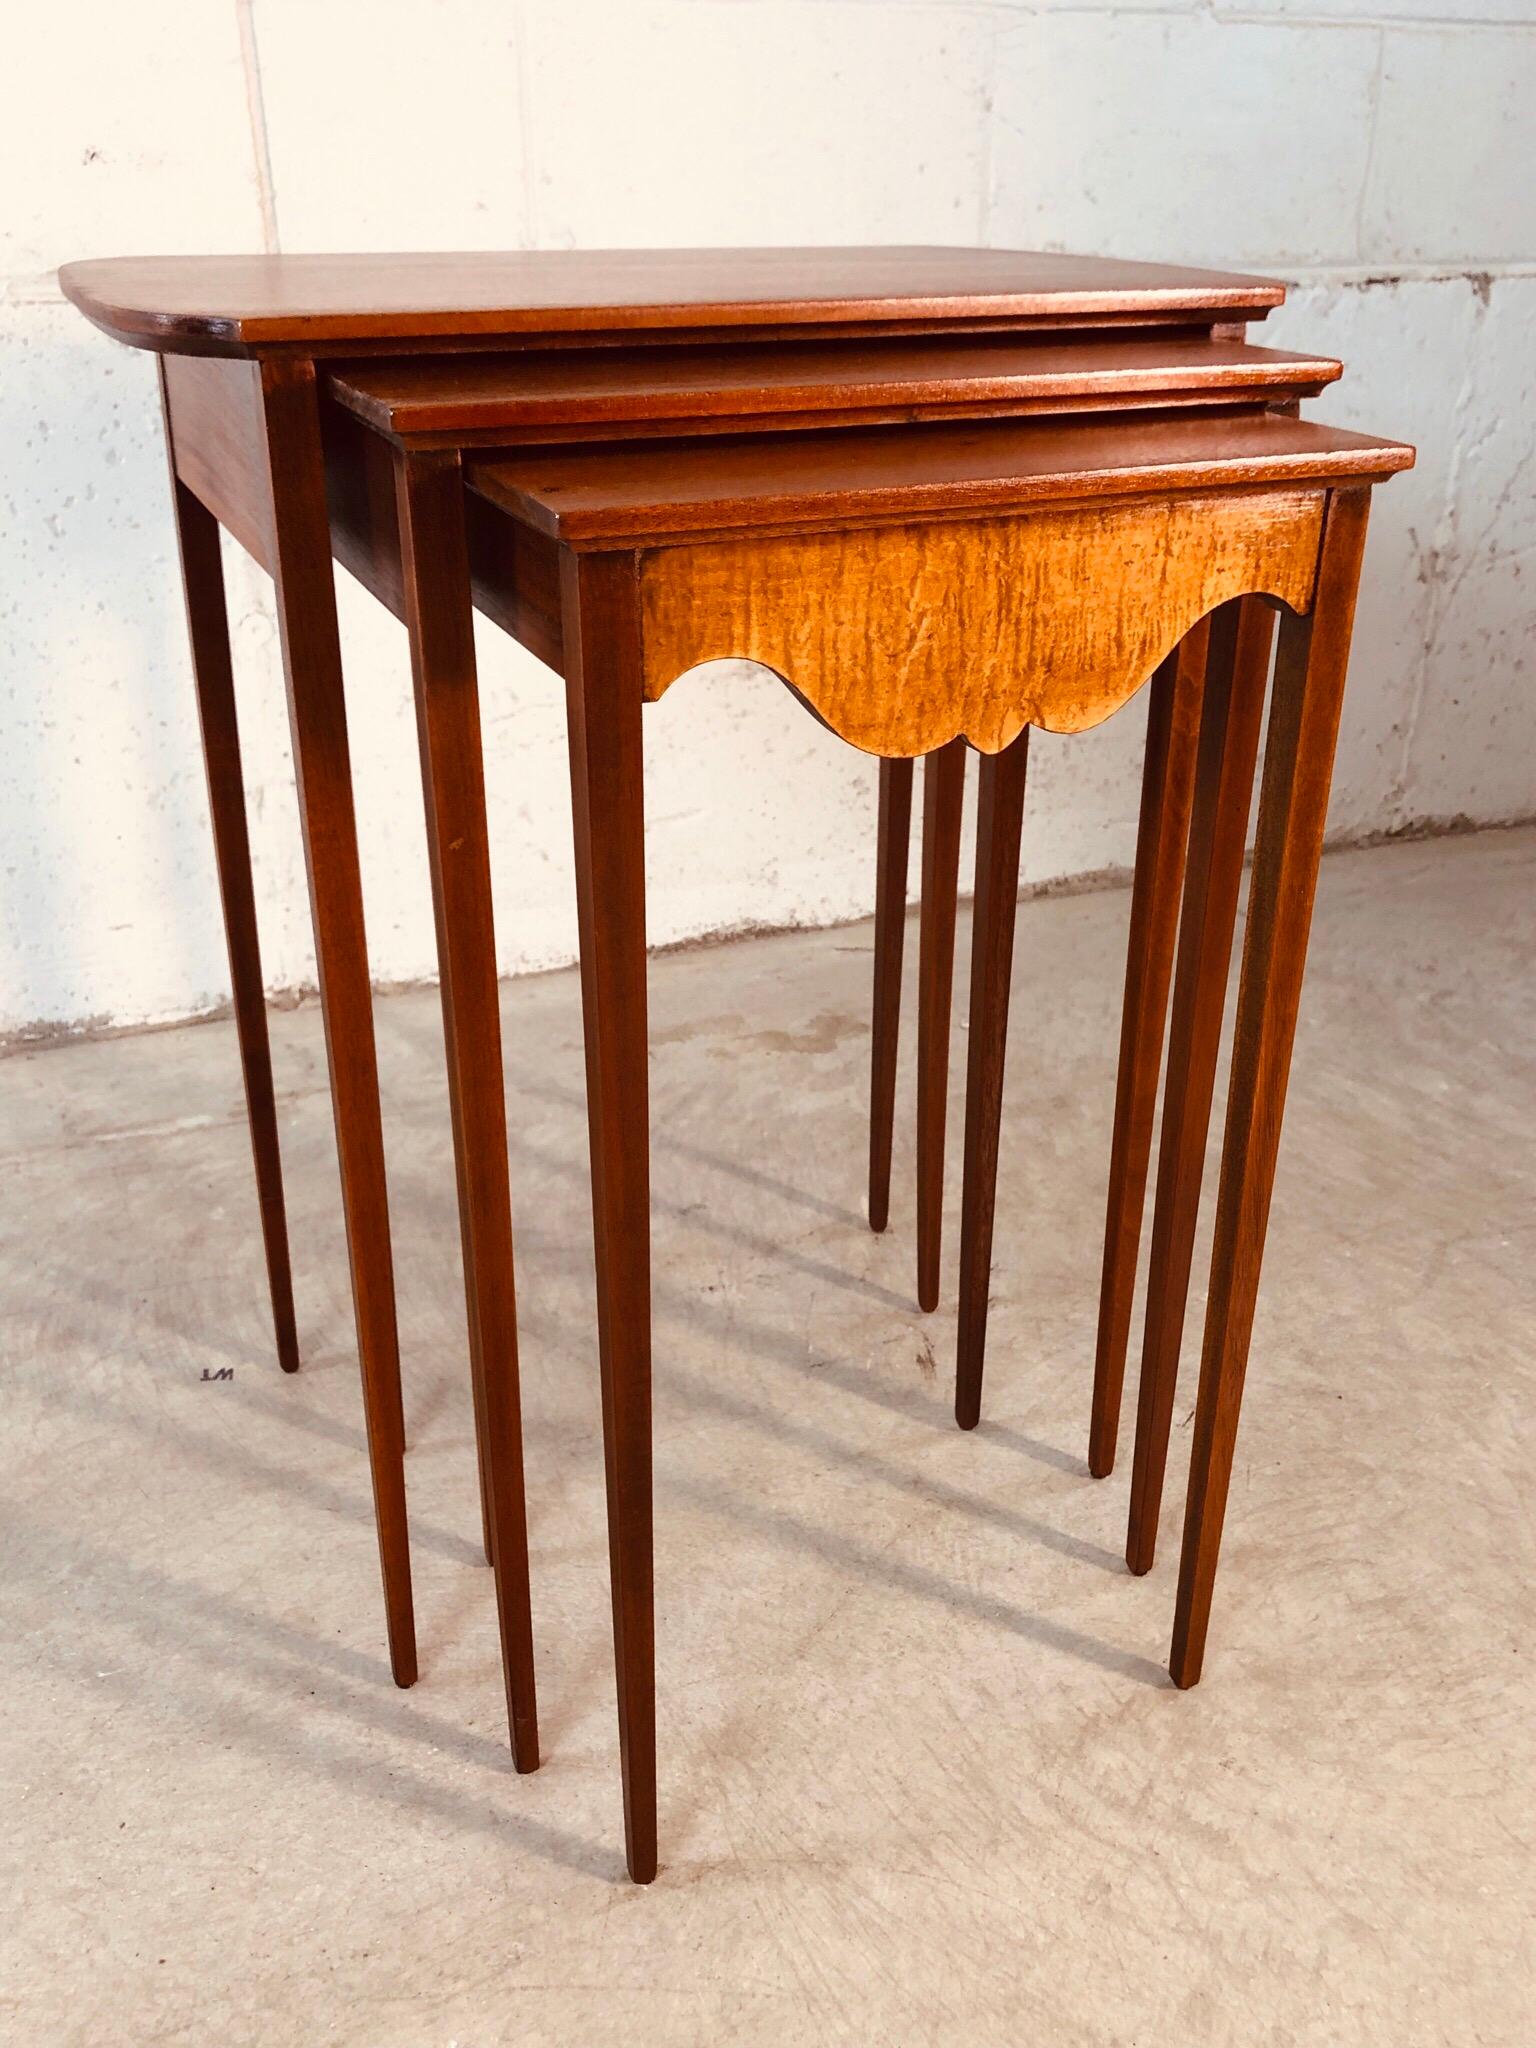 1950s Mahogany Nesting Tables with Tiger Maple Accent, Set of 3 In Good Condition For Sale In Amherst, NH